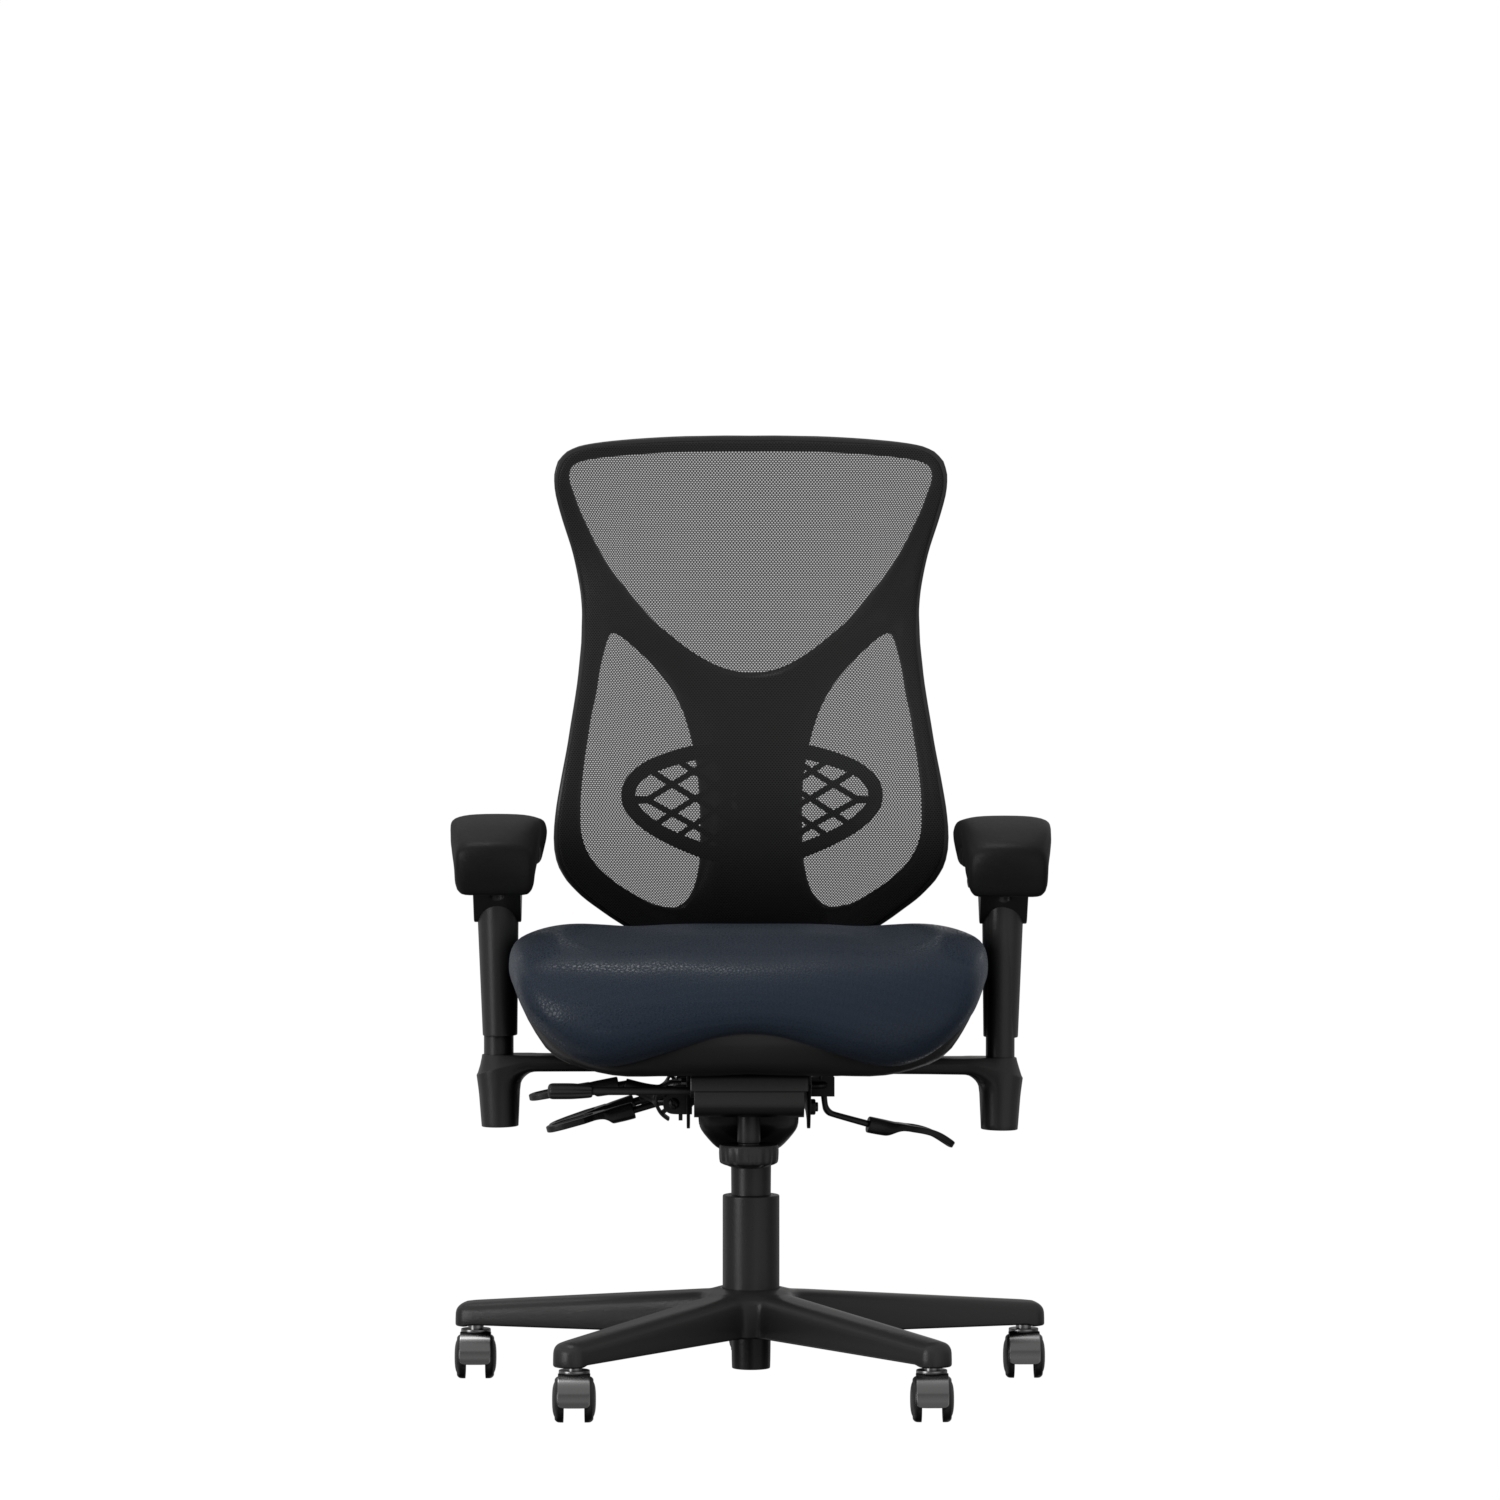 Midcelli 24/7 – 2800 Series – Intensive Use Chair